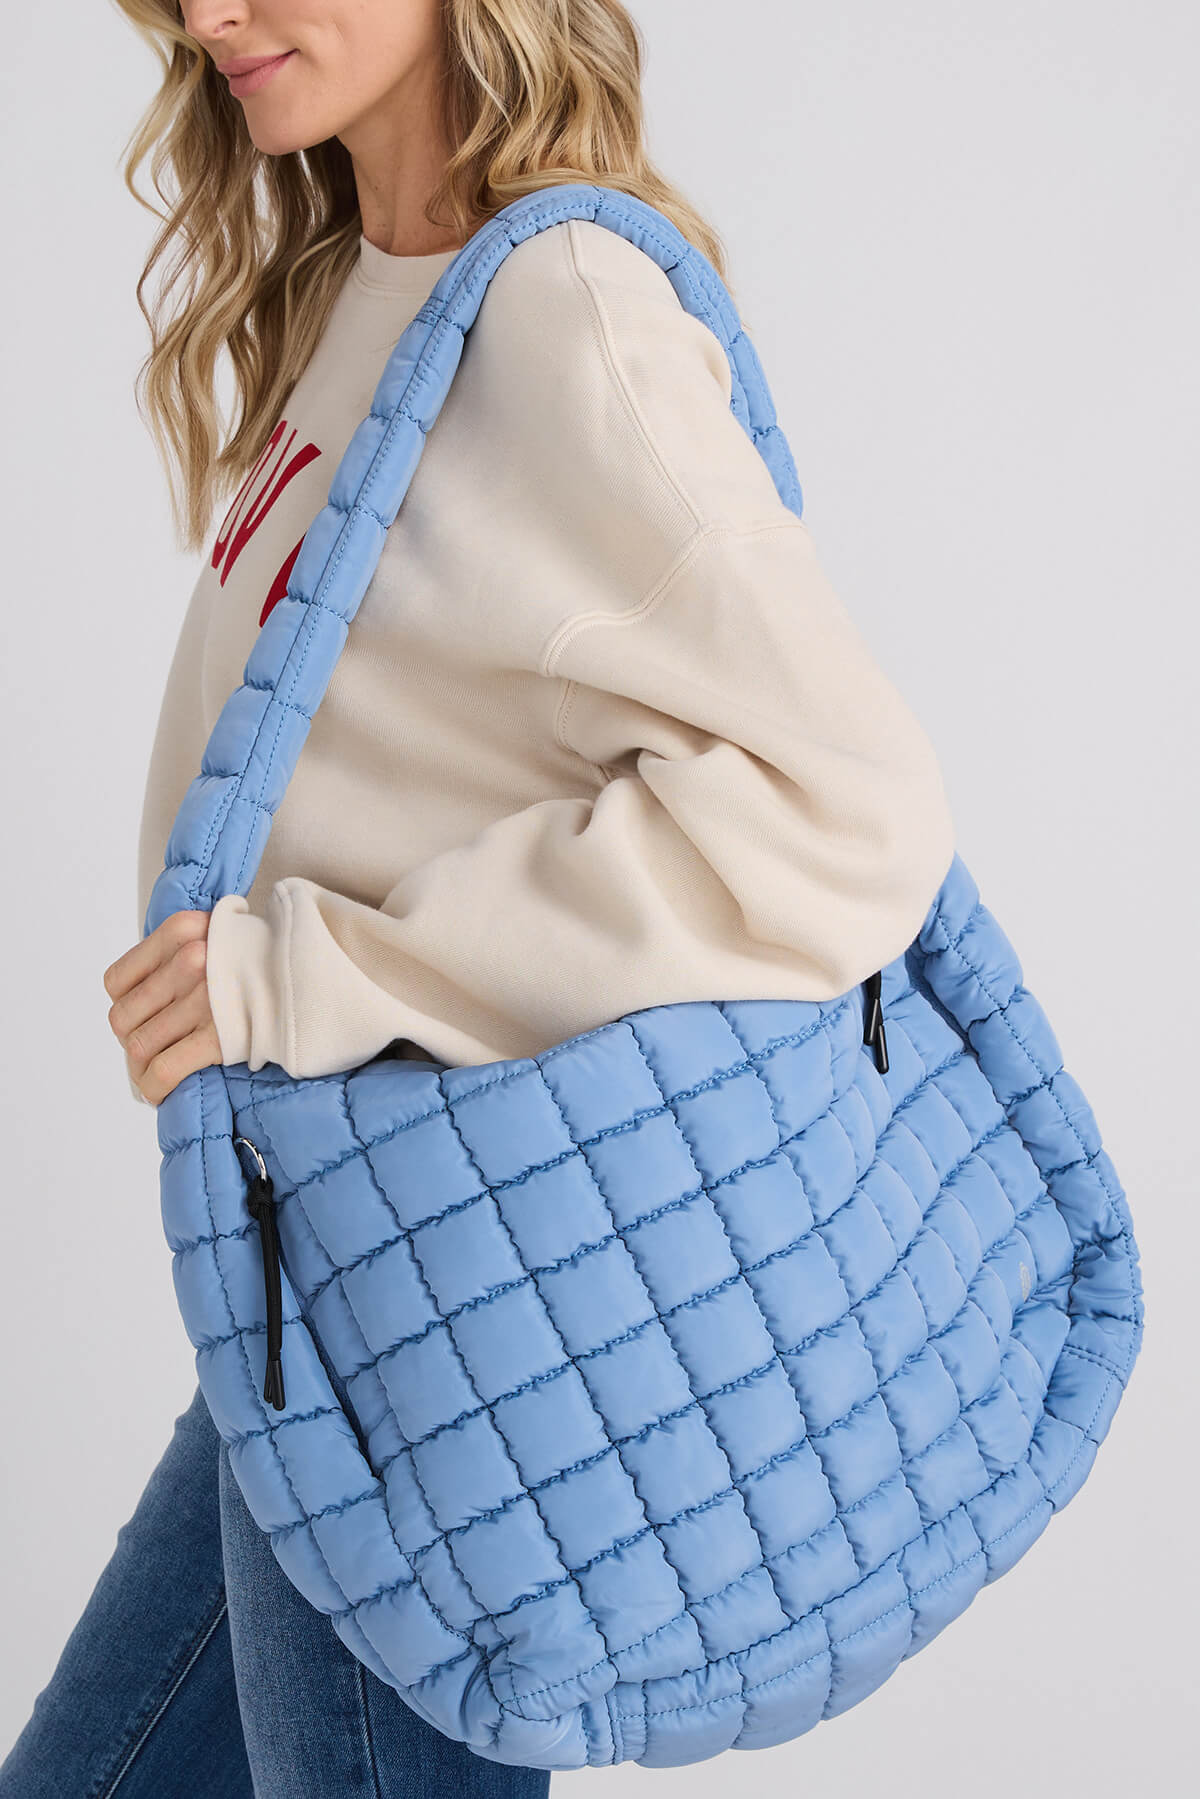 Free People Quilted Carryall Hobo Bag